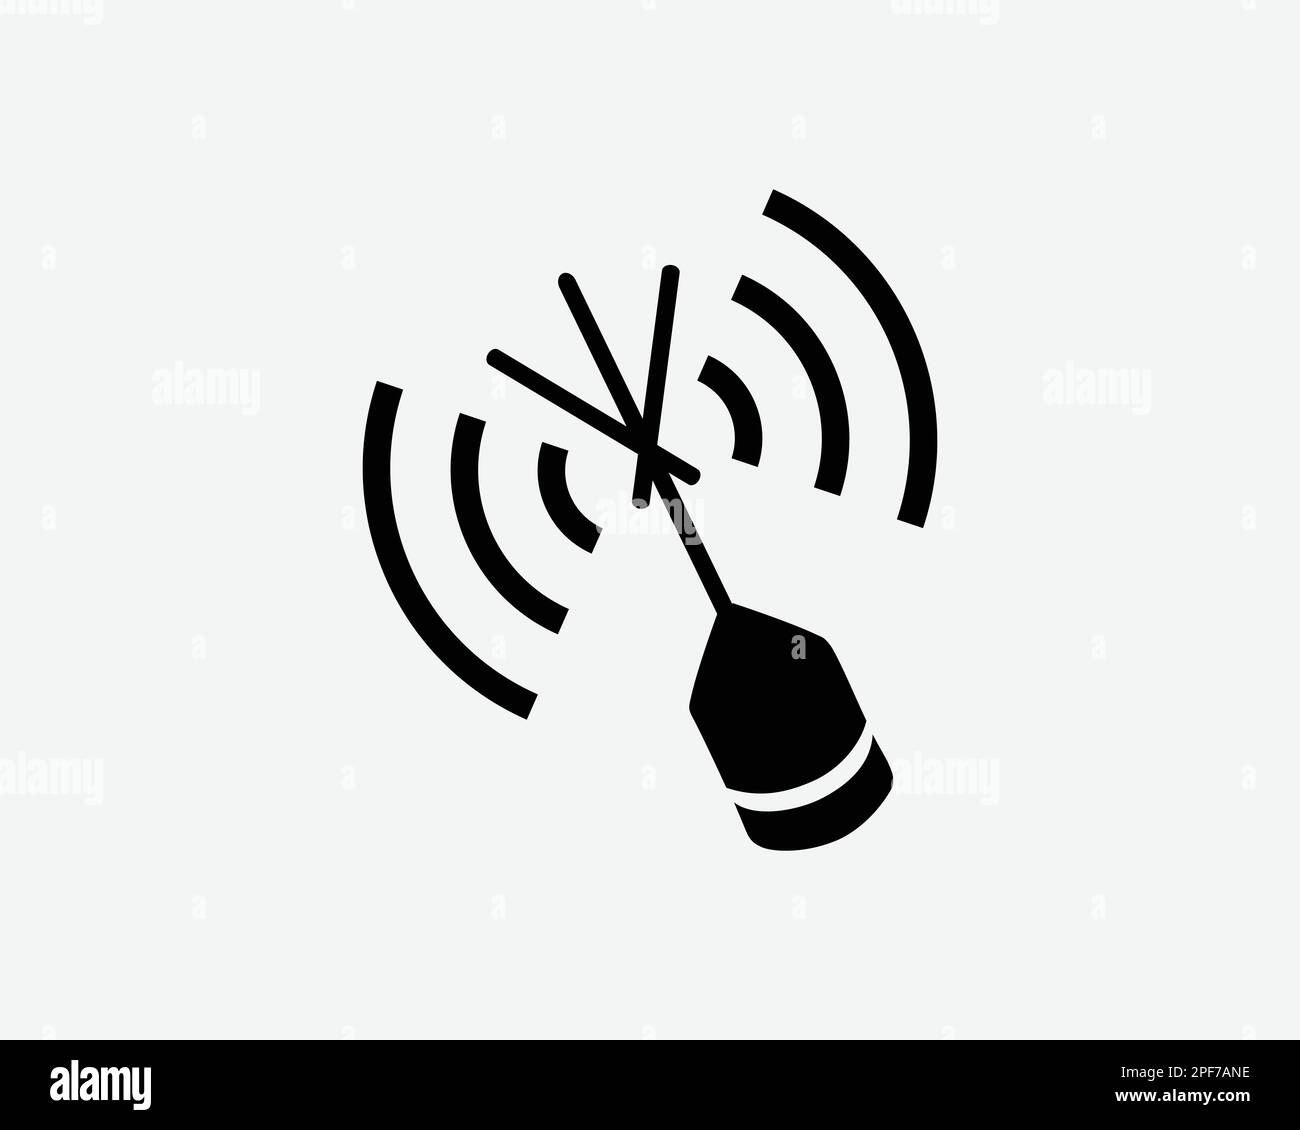 Emergency Beacon Floatation Marine Maritime Ping Signal Black White Silhouette Sign Symbol Icon Graphic Clipart Artwork Illustration Pictogram Vector Stock Vector